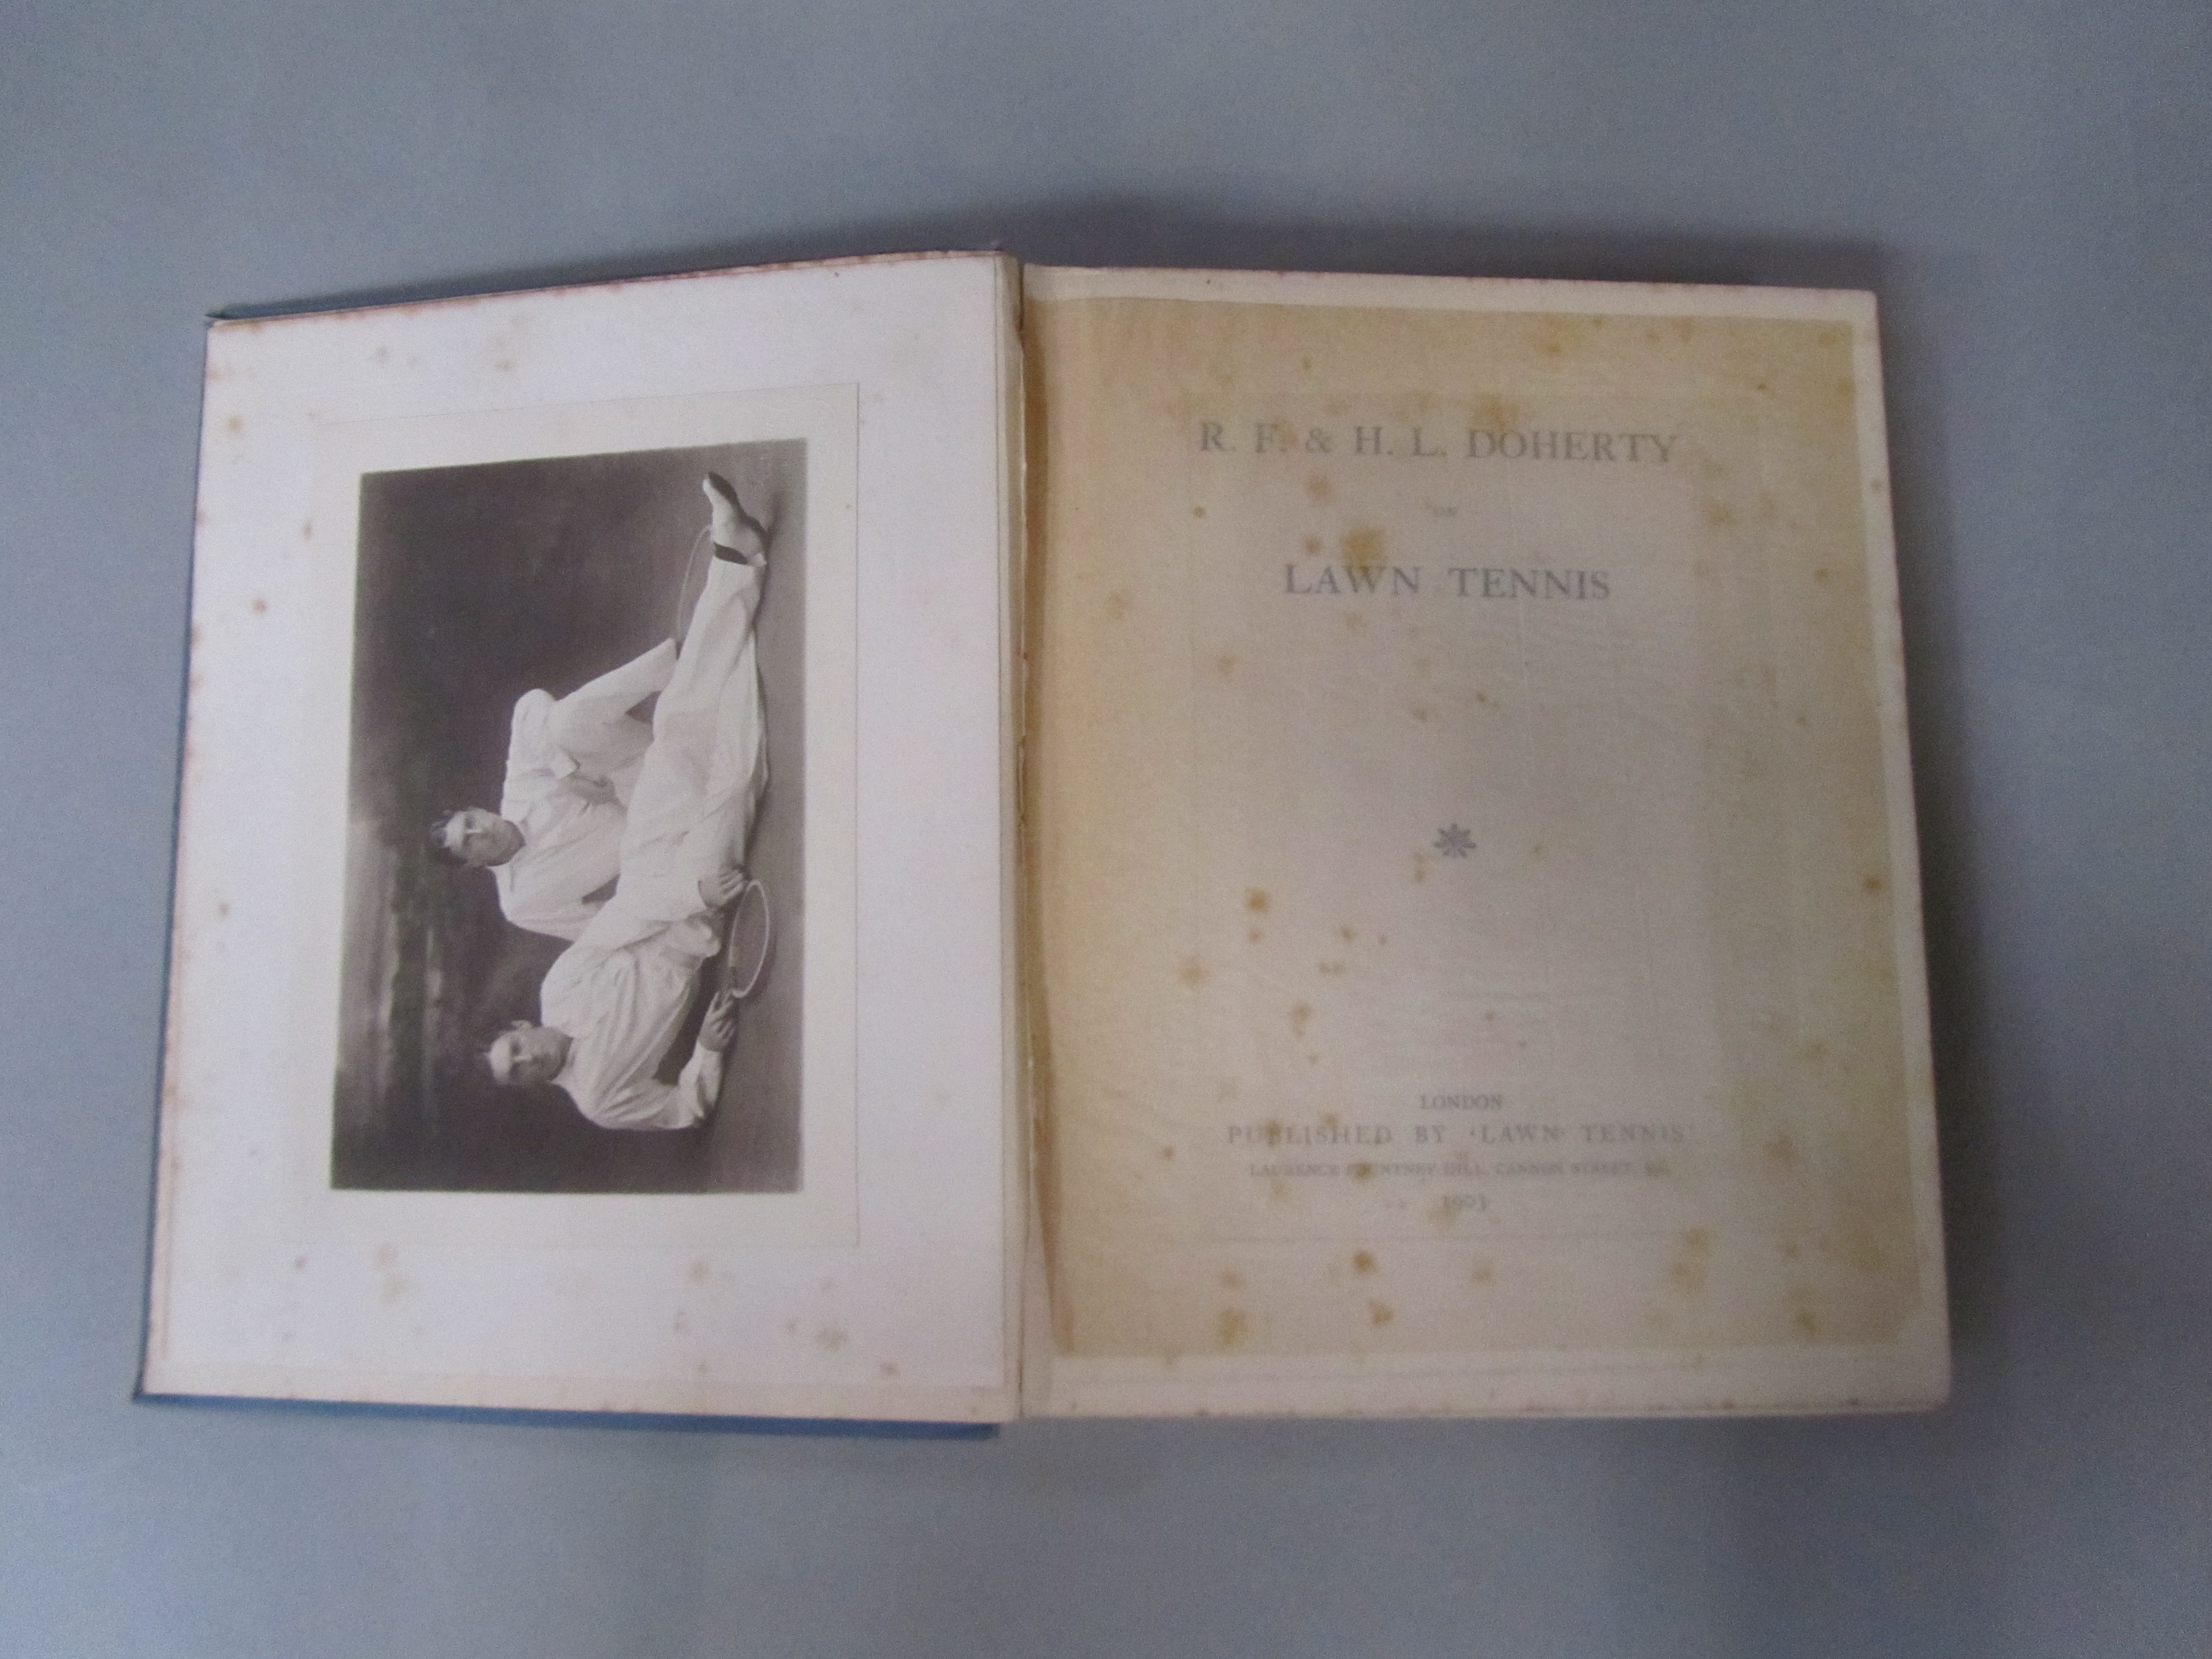 R.F. & H.L. Doherty on Lawn Tennis, published by "Lawn Tennis", 1903,  blue hardback with white - Image 5 of 12